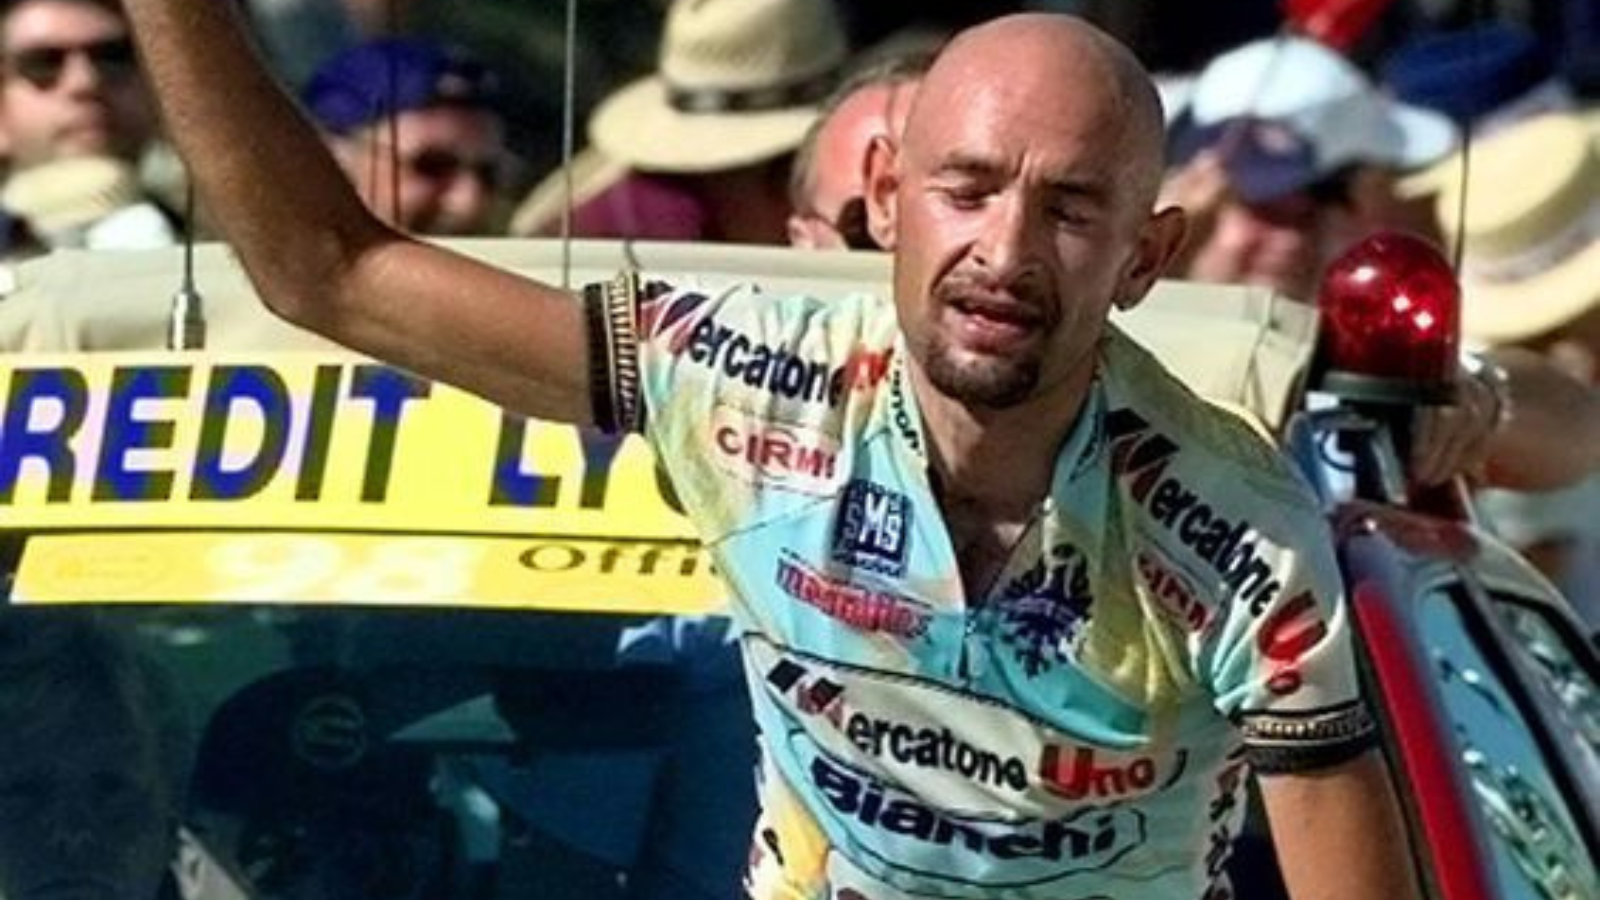 Italian rider Marco Pantani wins the Tour de France stage finishing on Plateau de Beille for the first time in 1998.